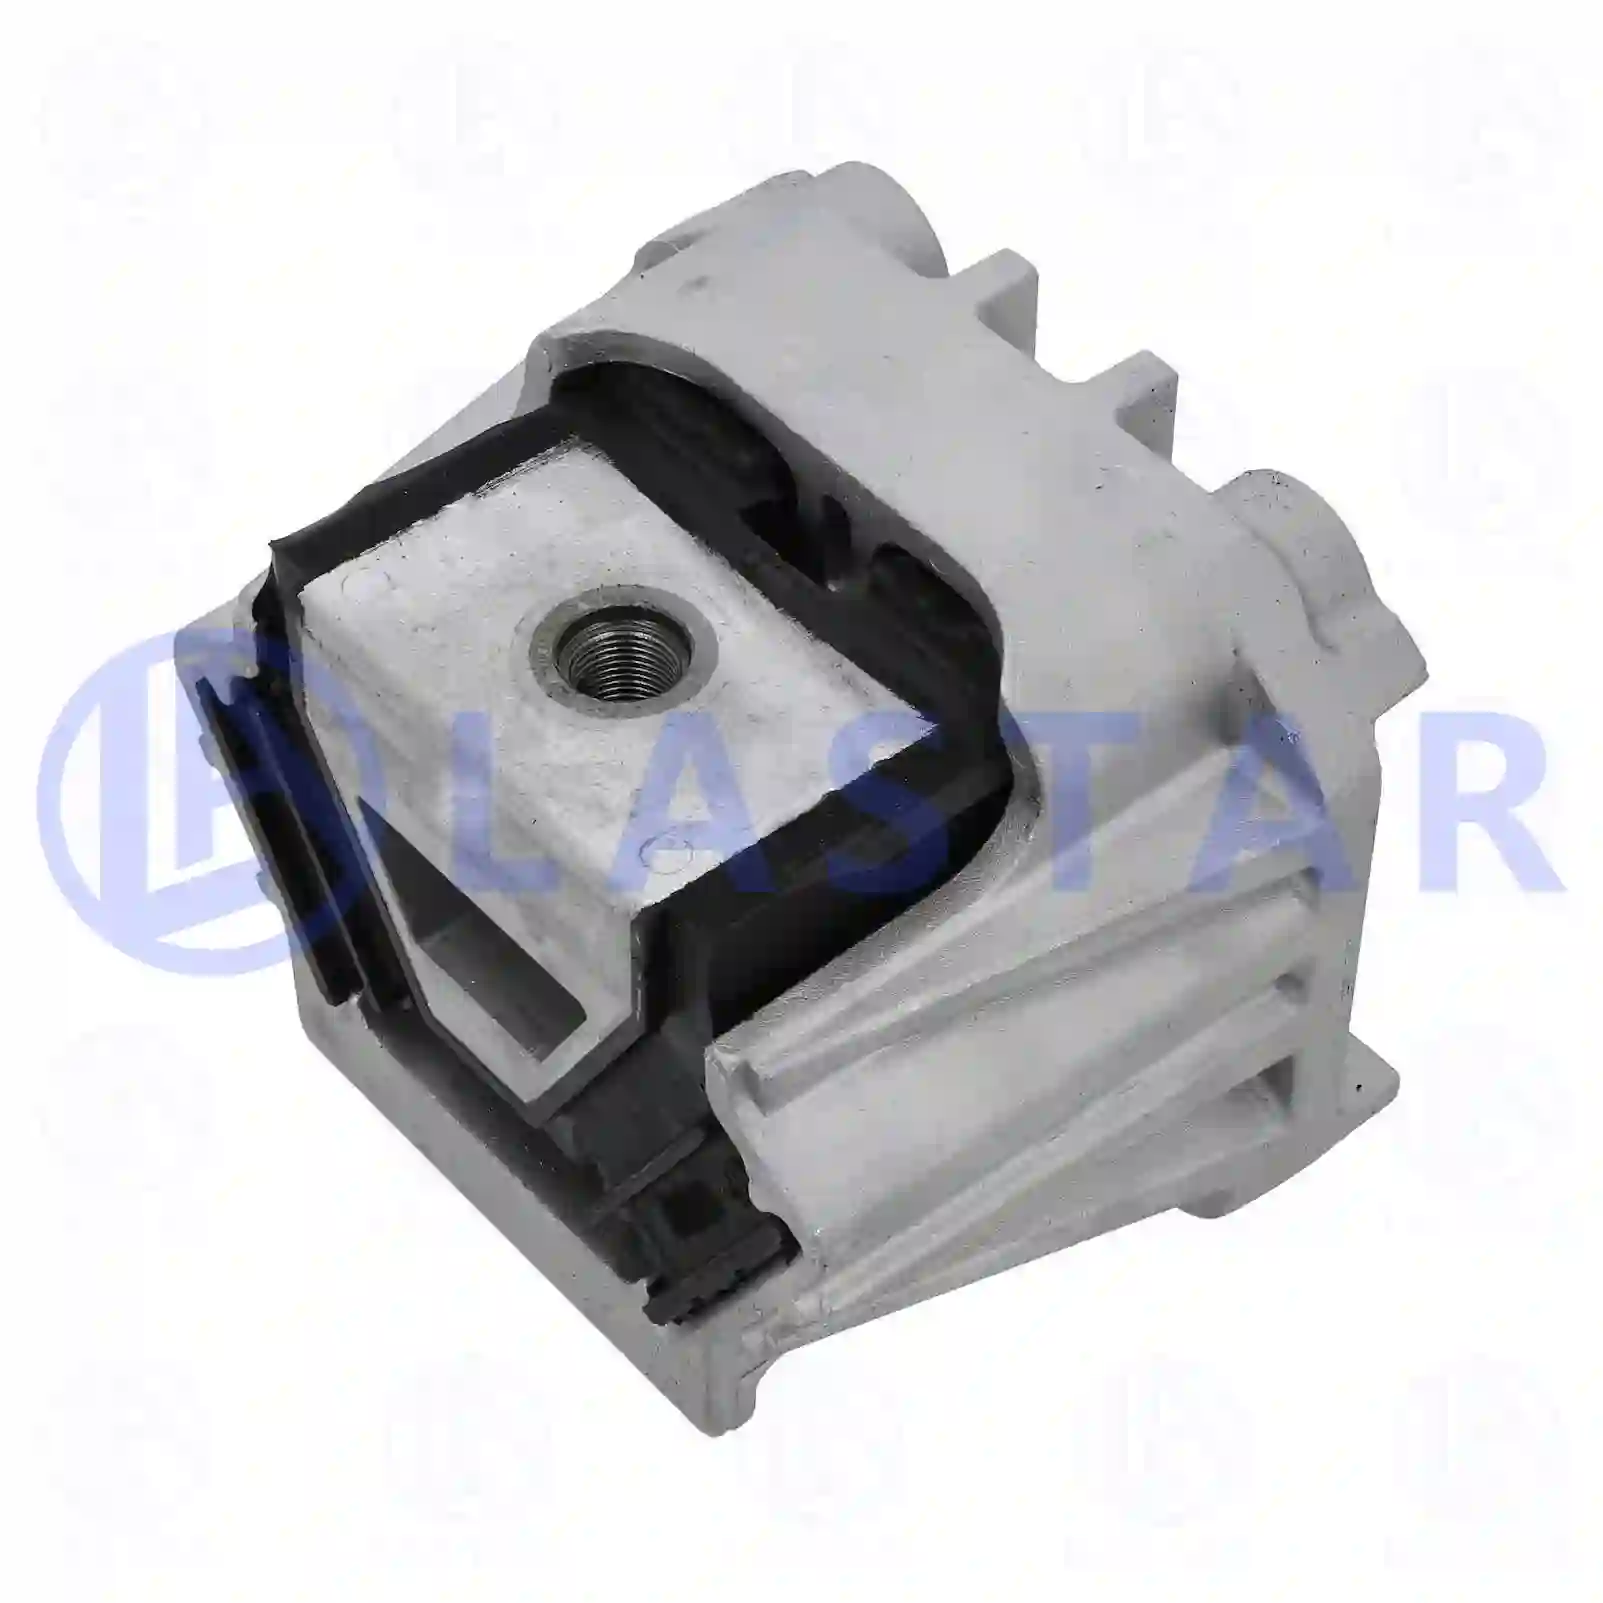 Engine mounting, 77702430, 6292400218, ZG01105-0008, , , ||  77702430 Lastar Spare Part | Truck Spare Parts, Auotomotive Spare Parts Engine mounting, 77702430, 6292400218, ZG01105-0008, , , ||  77702430 Lastar Spare Part | Truck Spare Parts, Auotomotive Spare Parts